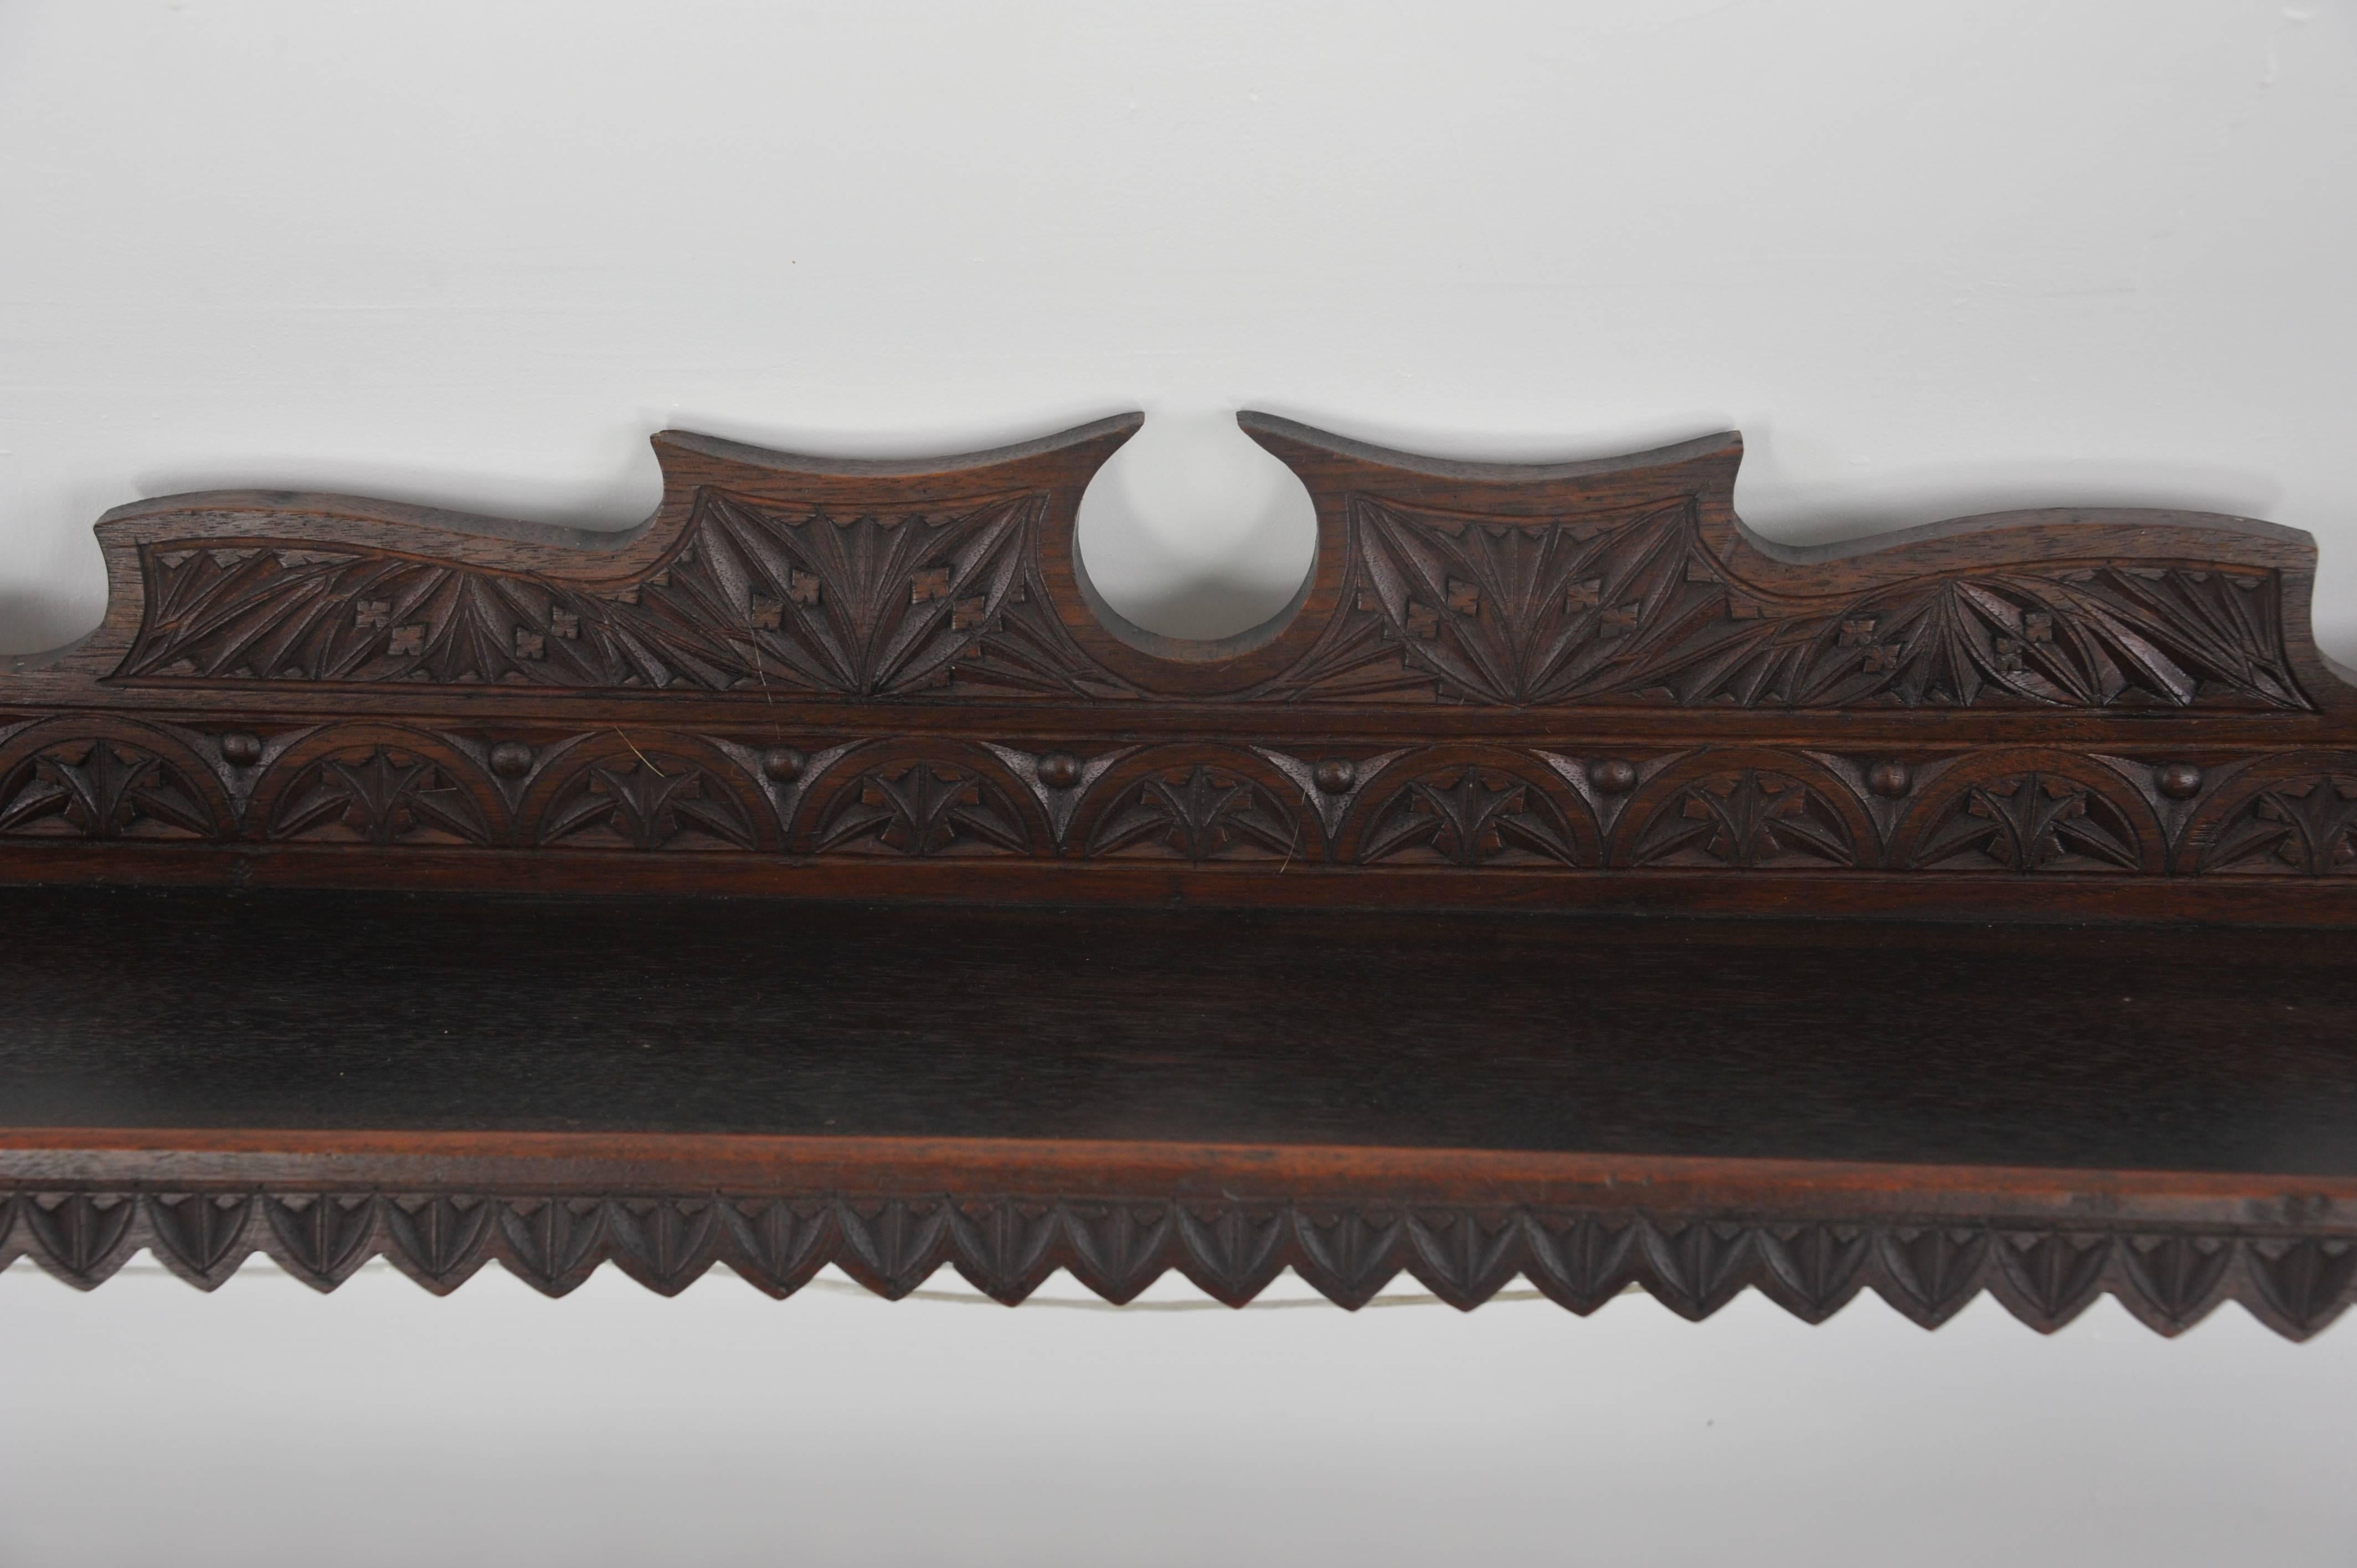 Antique plate rack, solid walnut, Victorian, chip carved, hanging shelf, Scotland 1880, B988A

Scotland, 1889
Solid walnut construction
Original finish
Smothered in crisp chip carving
Full shelf above
Two shelves below are grooved for the plates to